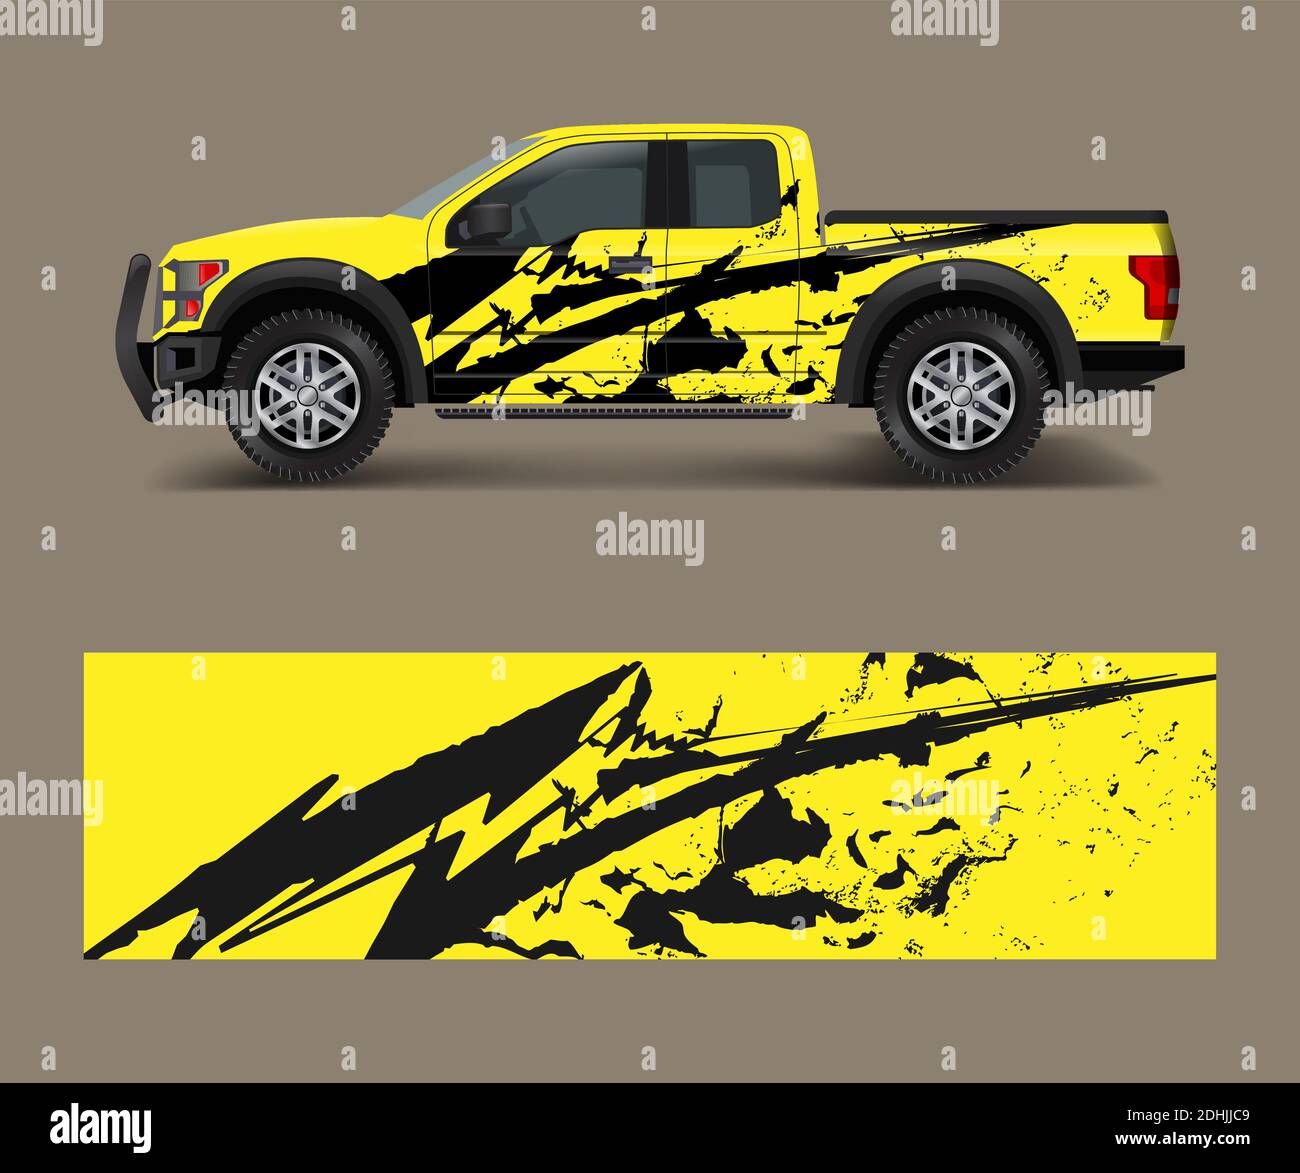 https://c8.alamy.com/comp/2DHJJC9/custom-livery-race-rally-offroad-car-vehicle-sticker-and-tinting-car-wrap-decal-design-vector-2DHJJC9.jpg